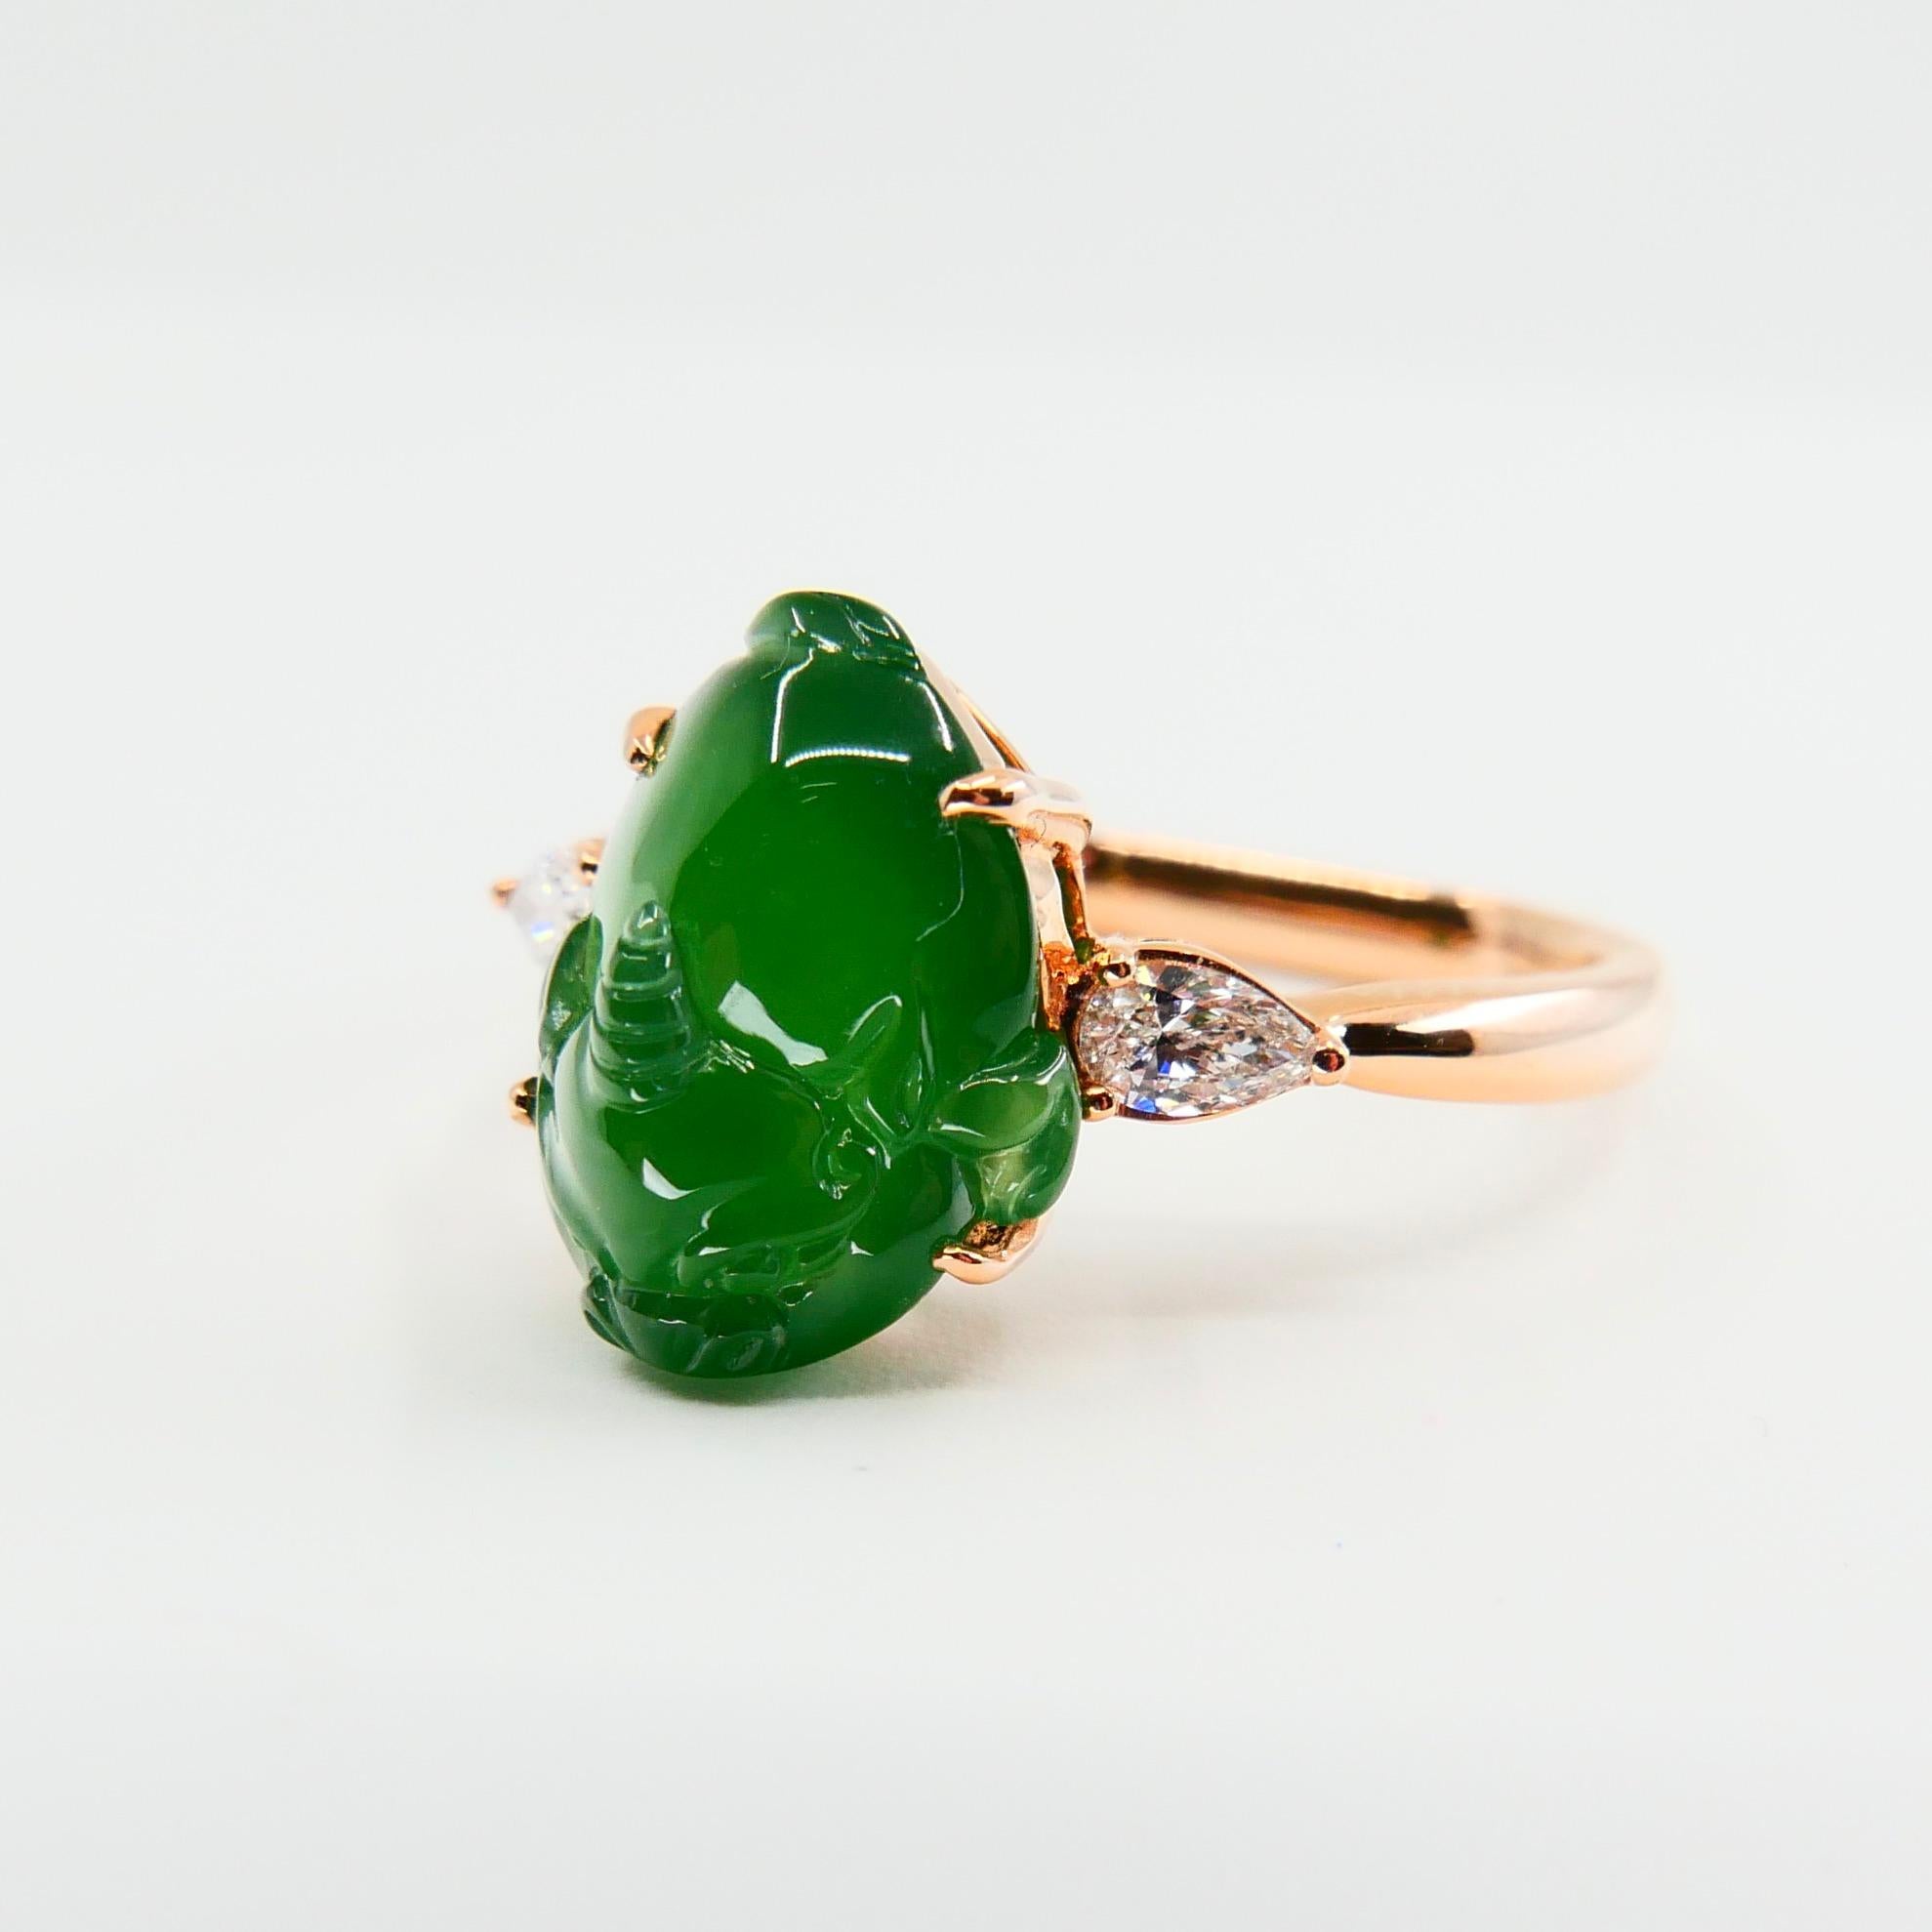 Certified 5.29 Carat Type A Jade and Diamond Cocktail Ring, Best Imperial Green 1